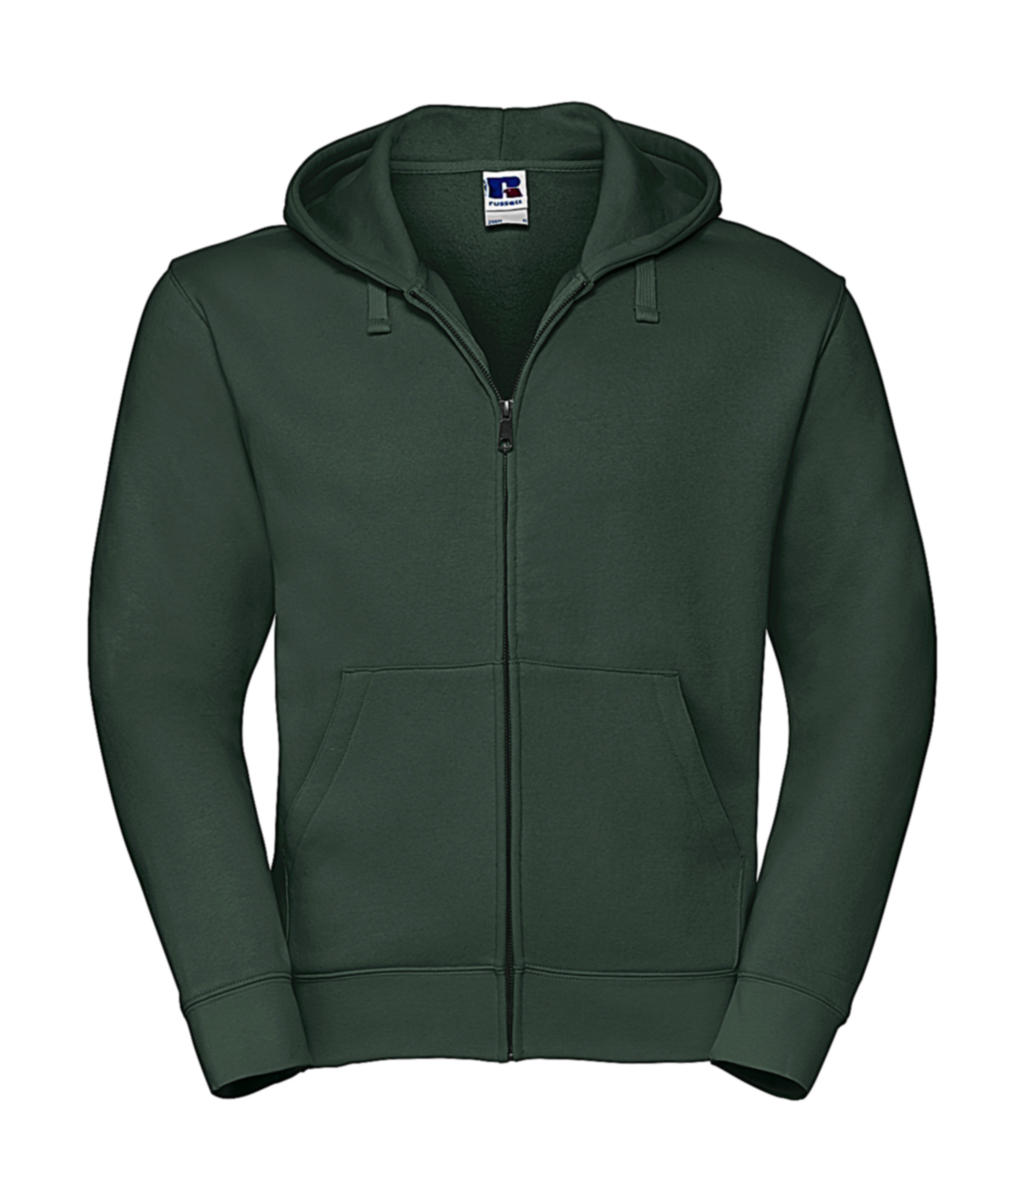  Mens Authentic Zipped Hood in Farbe Bottle Green